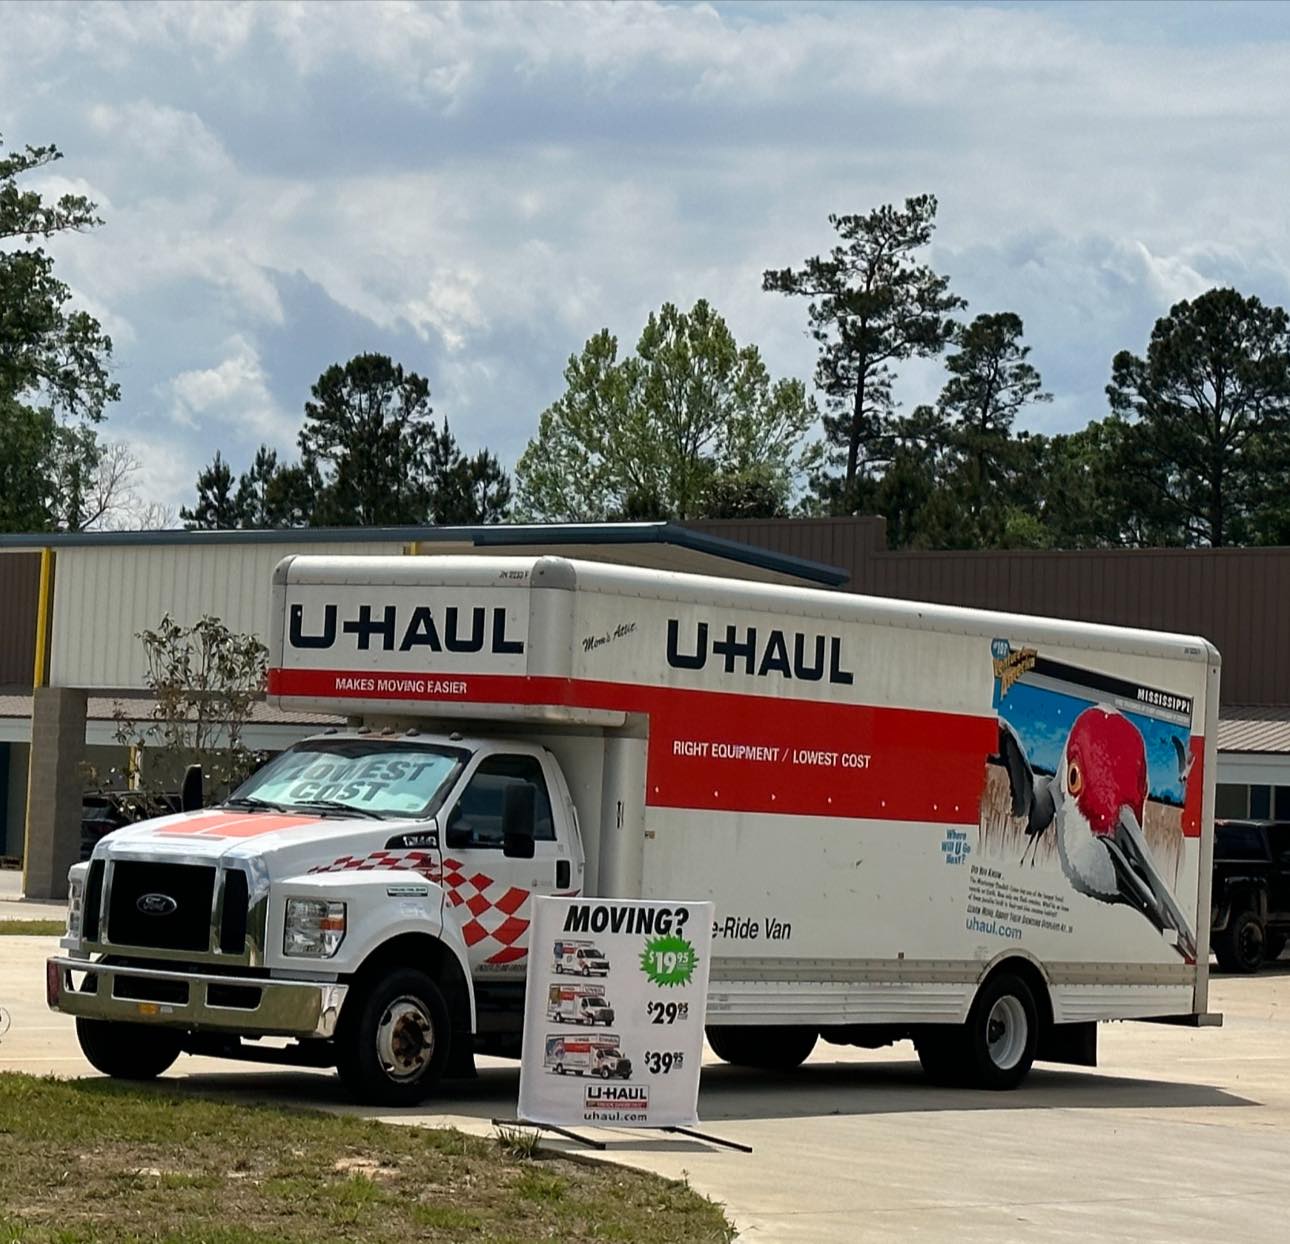 u-haul moving trucks available for rental